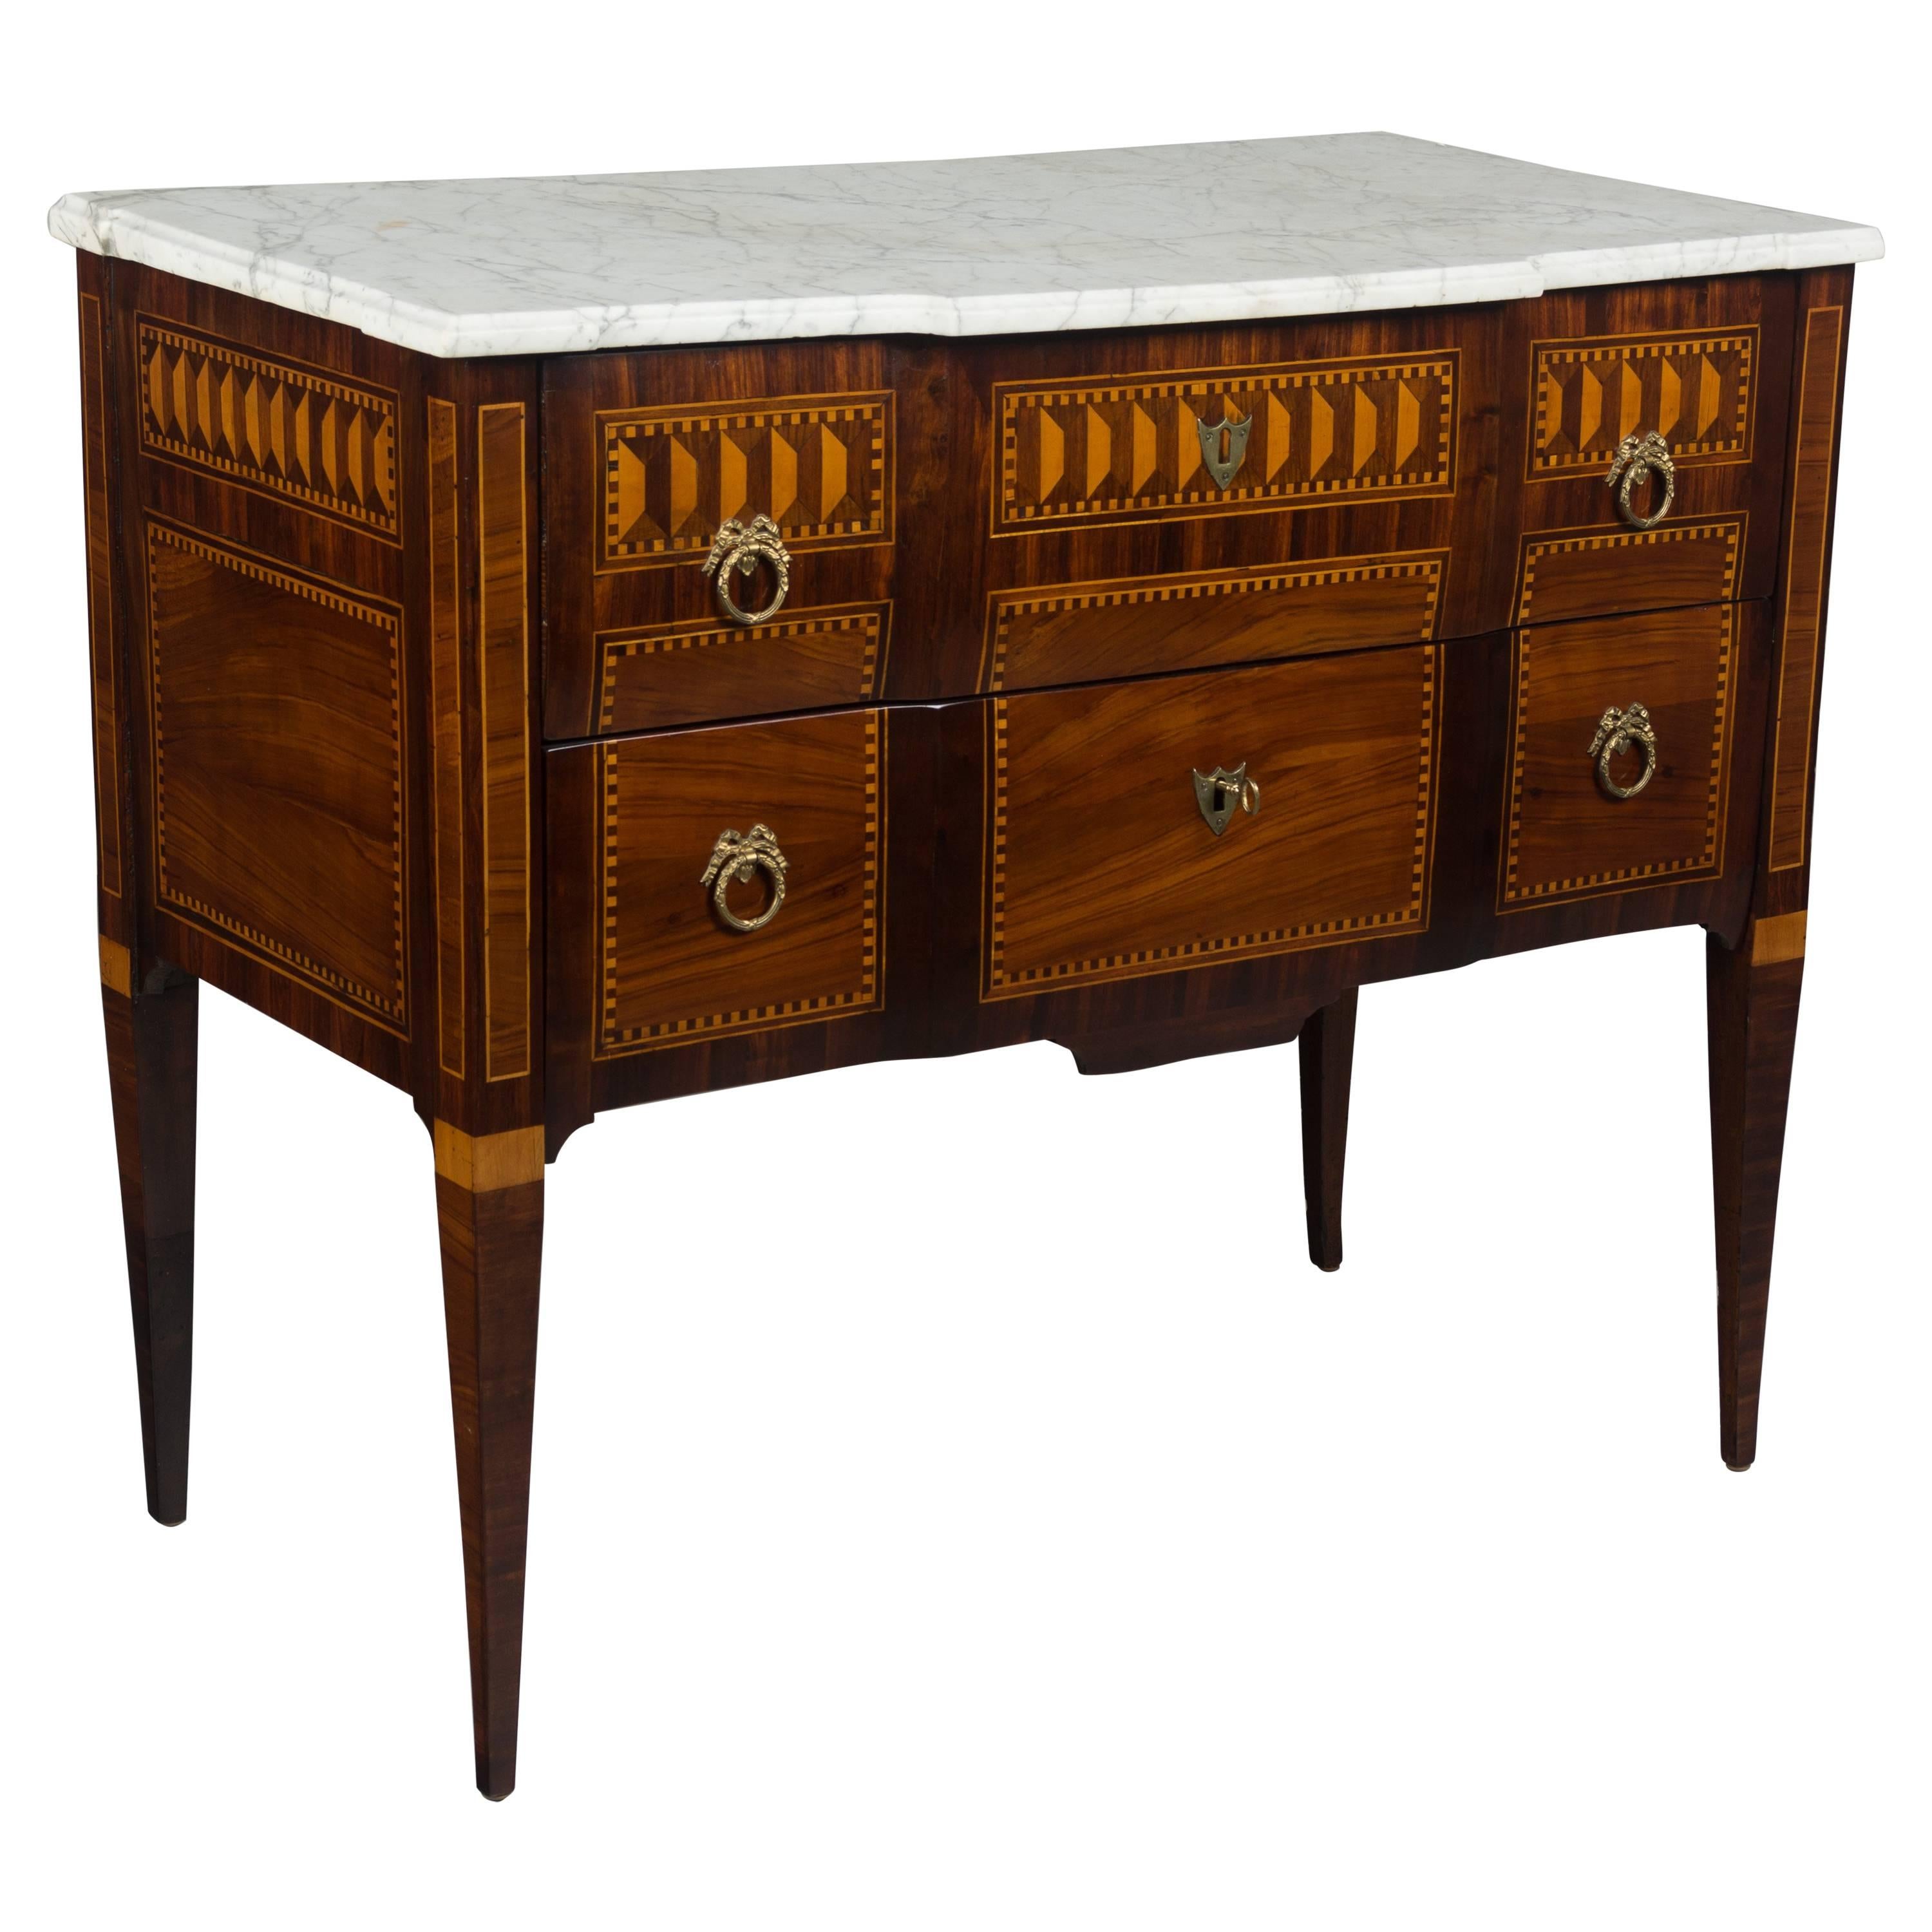 18th Century French Louis XVI Marquetry Commode